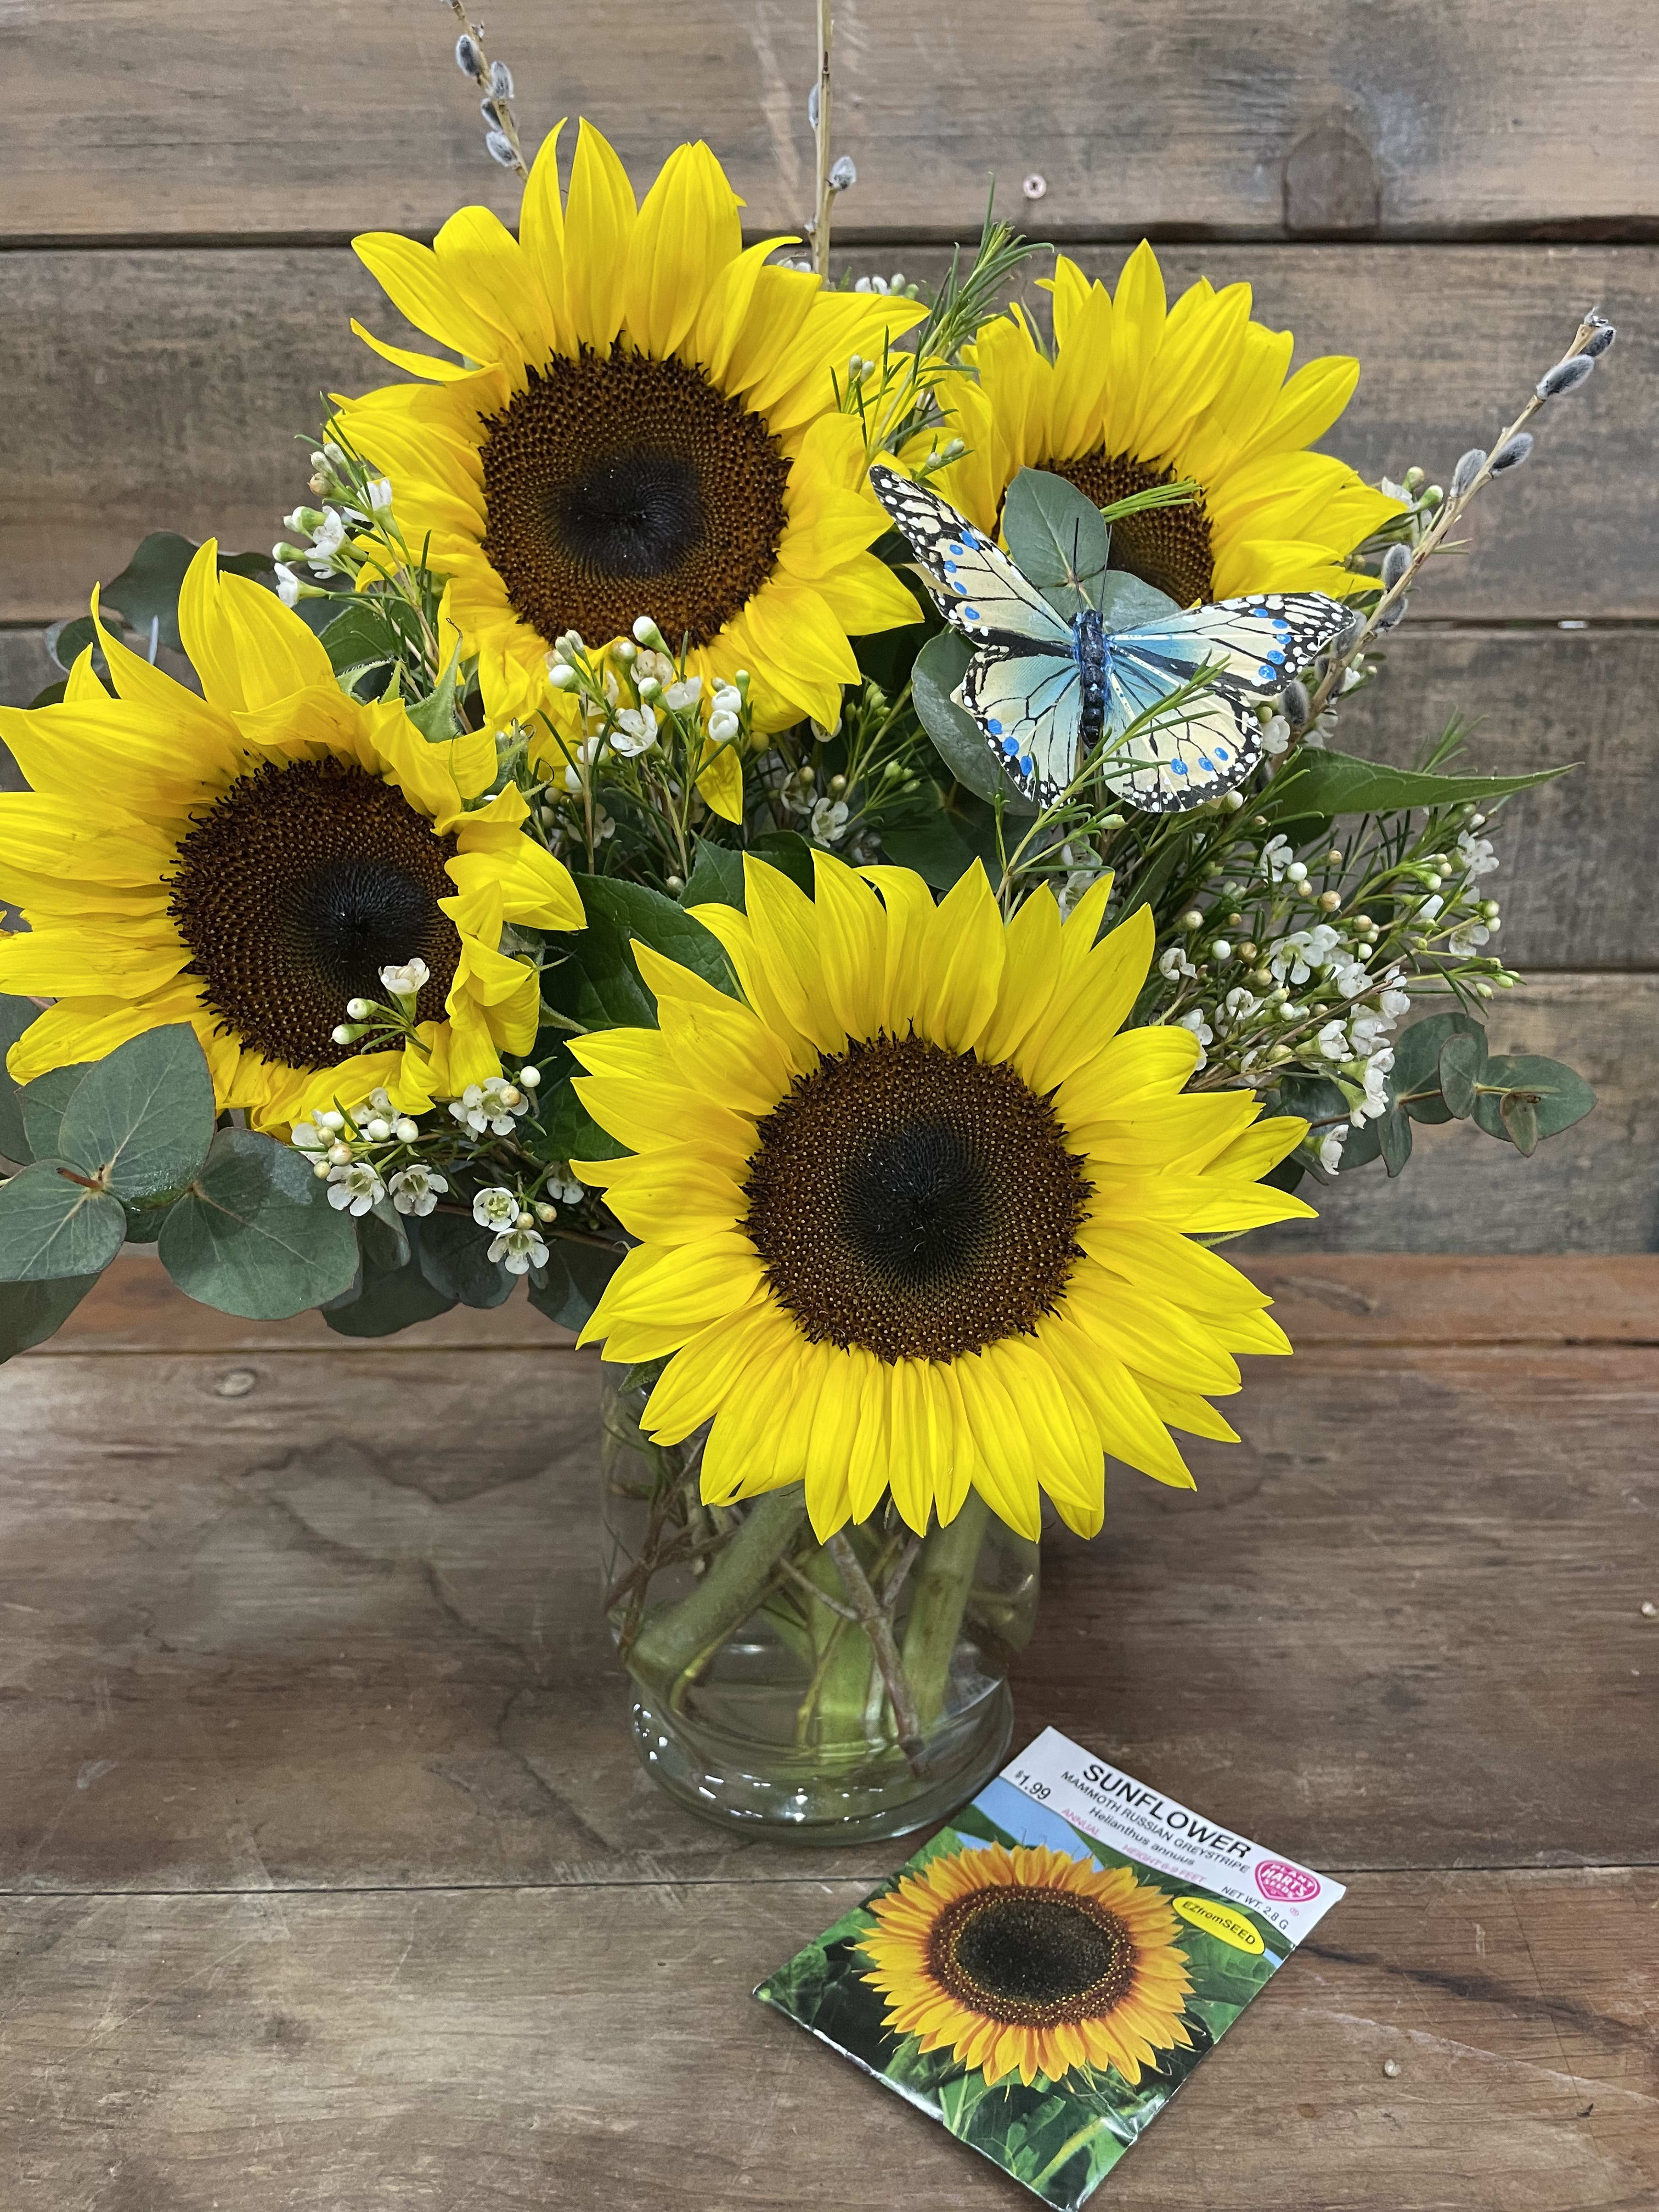 Sunflower Surprise  - A lovely Sunflower design with fresh filler and greens, with an addition of a silk butterfly. A sunflower seed packet is included to try your hand at cultivation. A perfect gift for a special Mom!